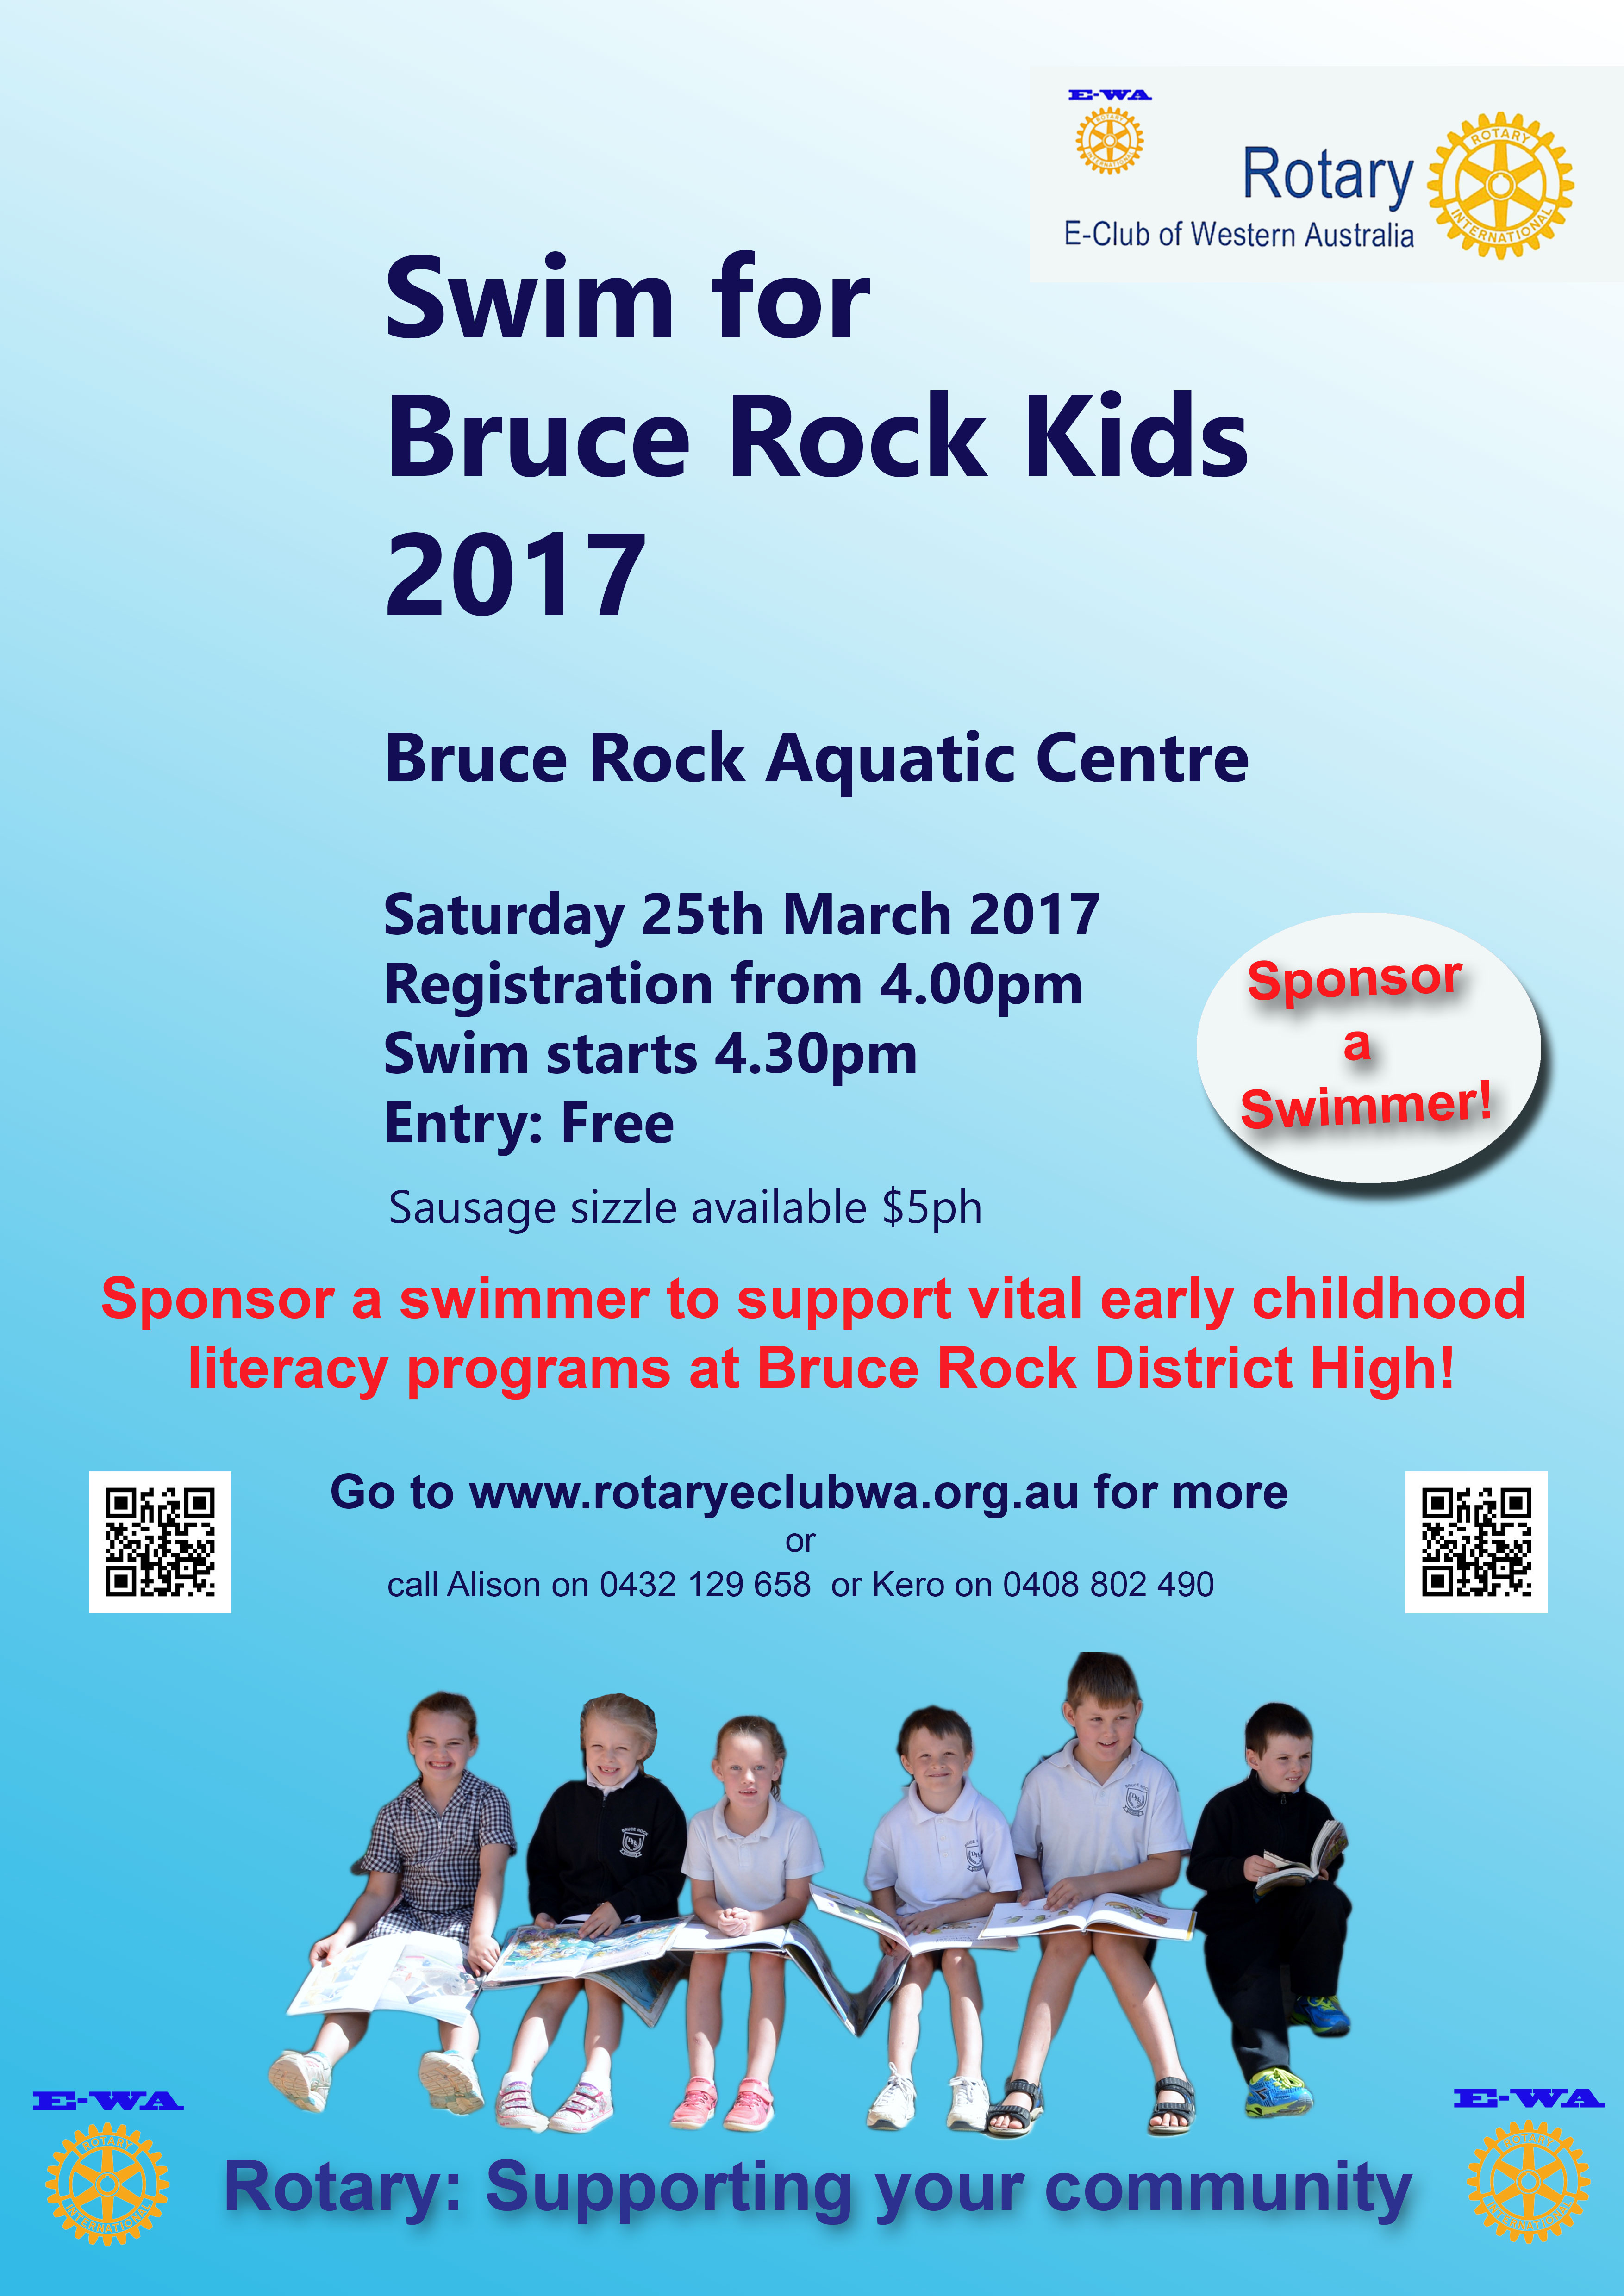 Poster showing details of the Swim in Bruce Rock on 25 March 2017